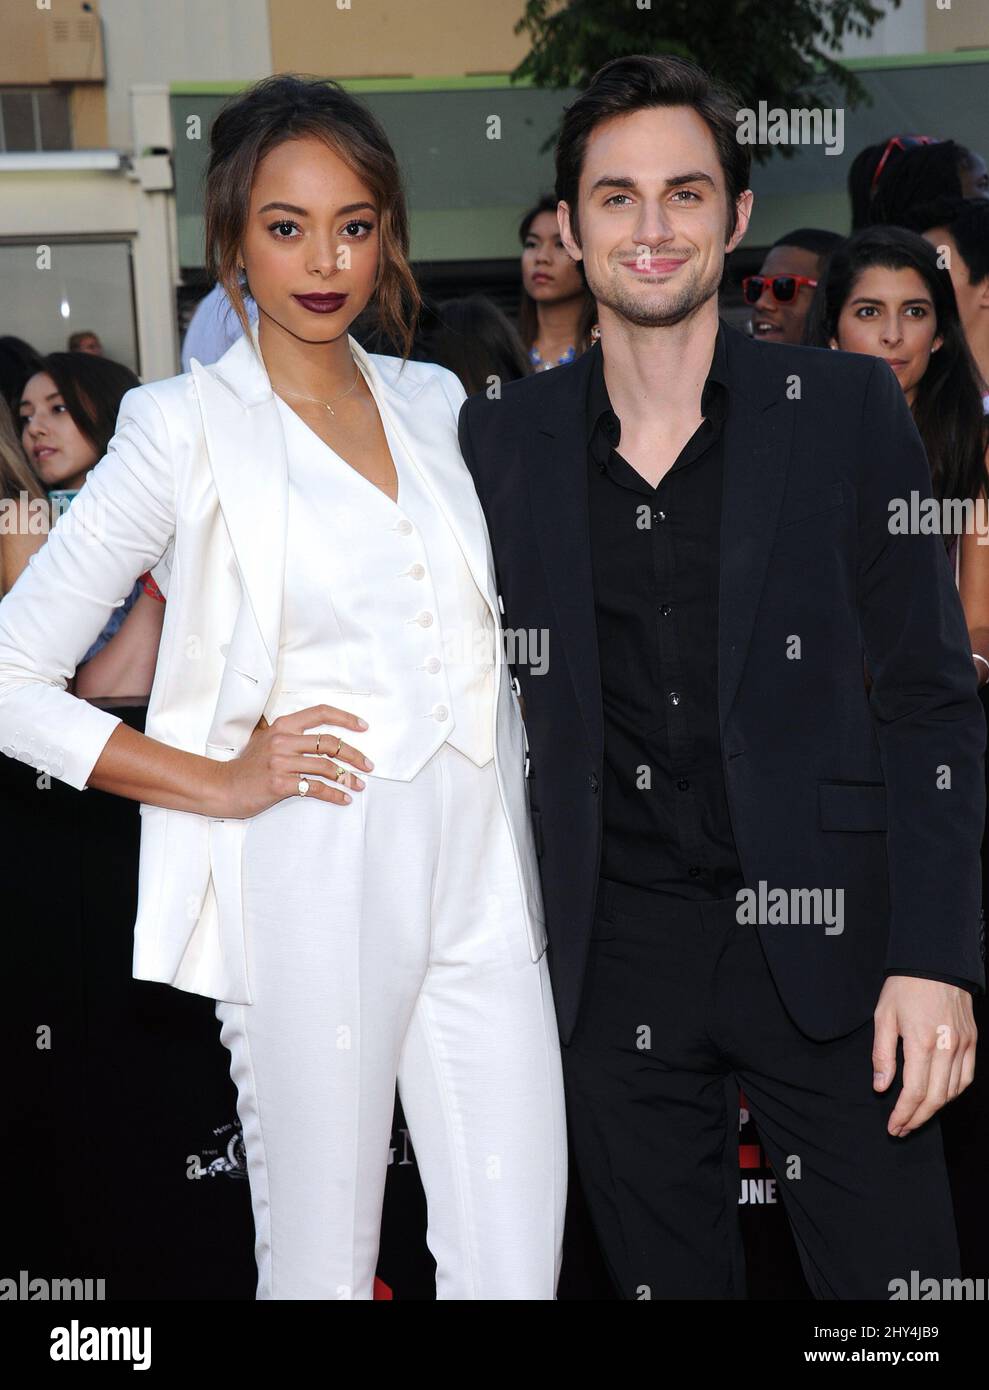 Amber Stevens & Andrew West frequentando la Jump Street World Premiere 22 a Los Angeles Foto Stock